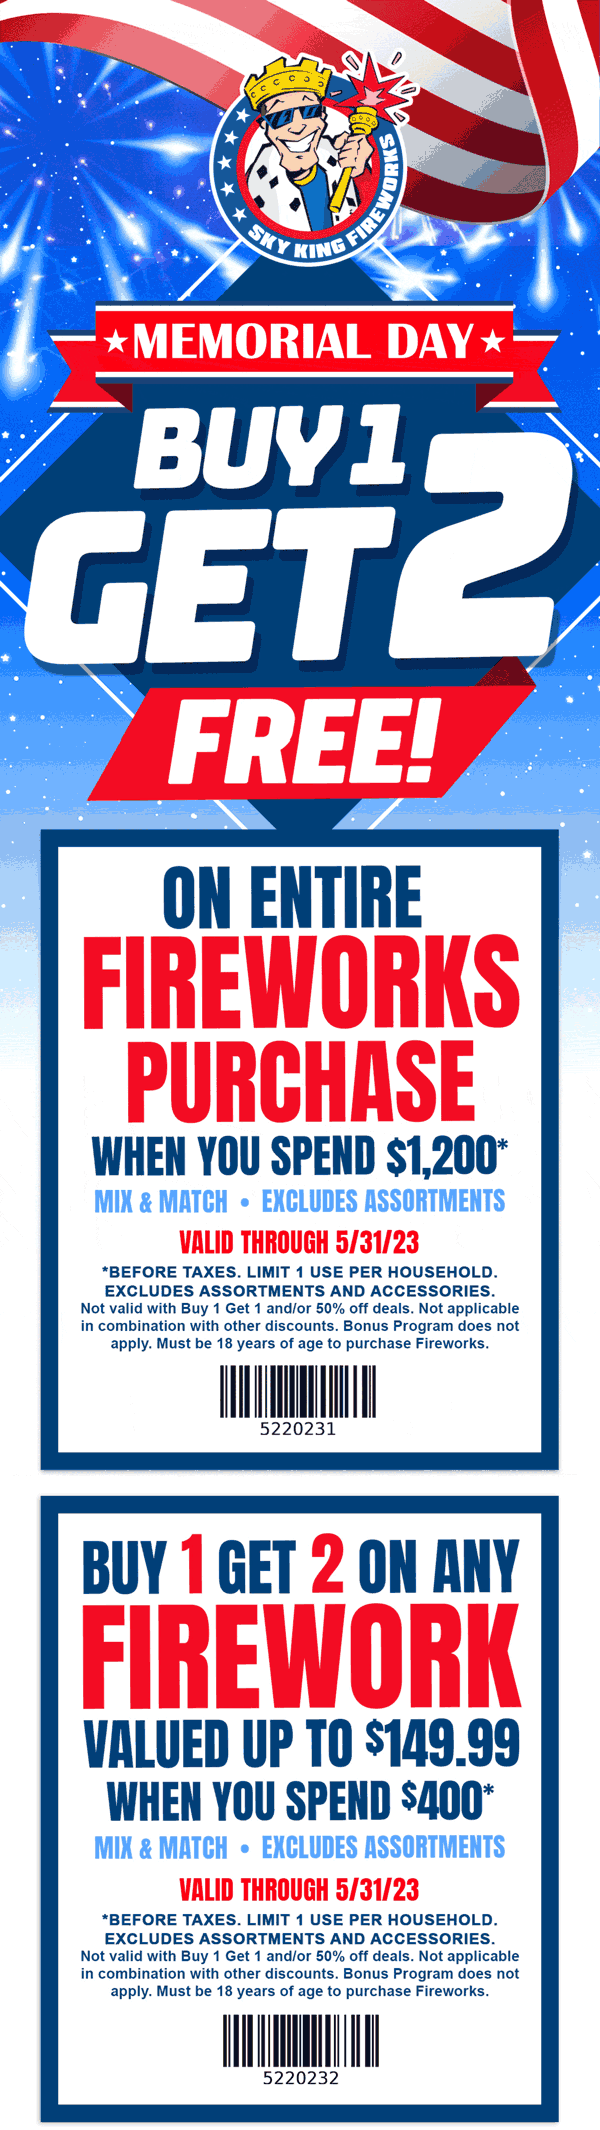 Sky King stores Coupon  Second firework free & more at Sky King #skyking 